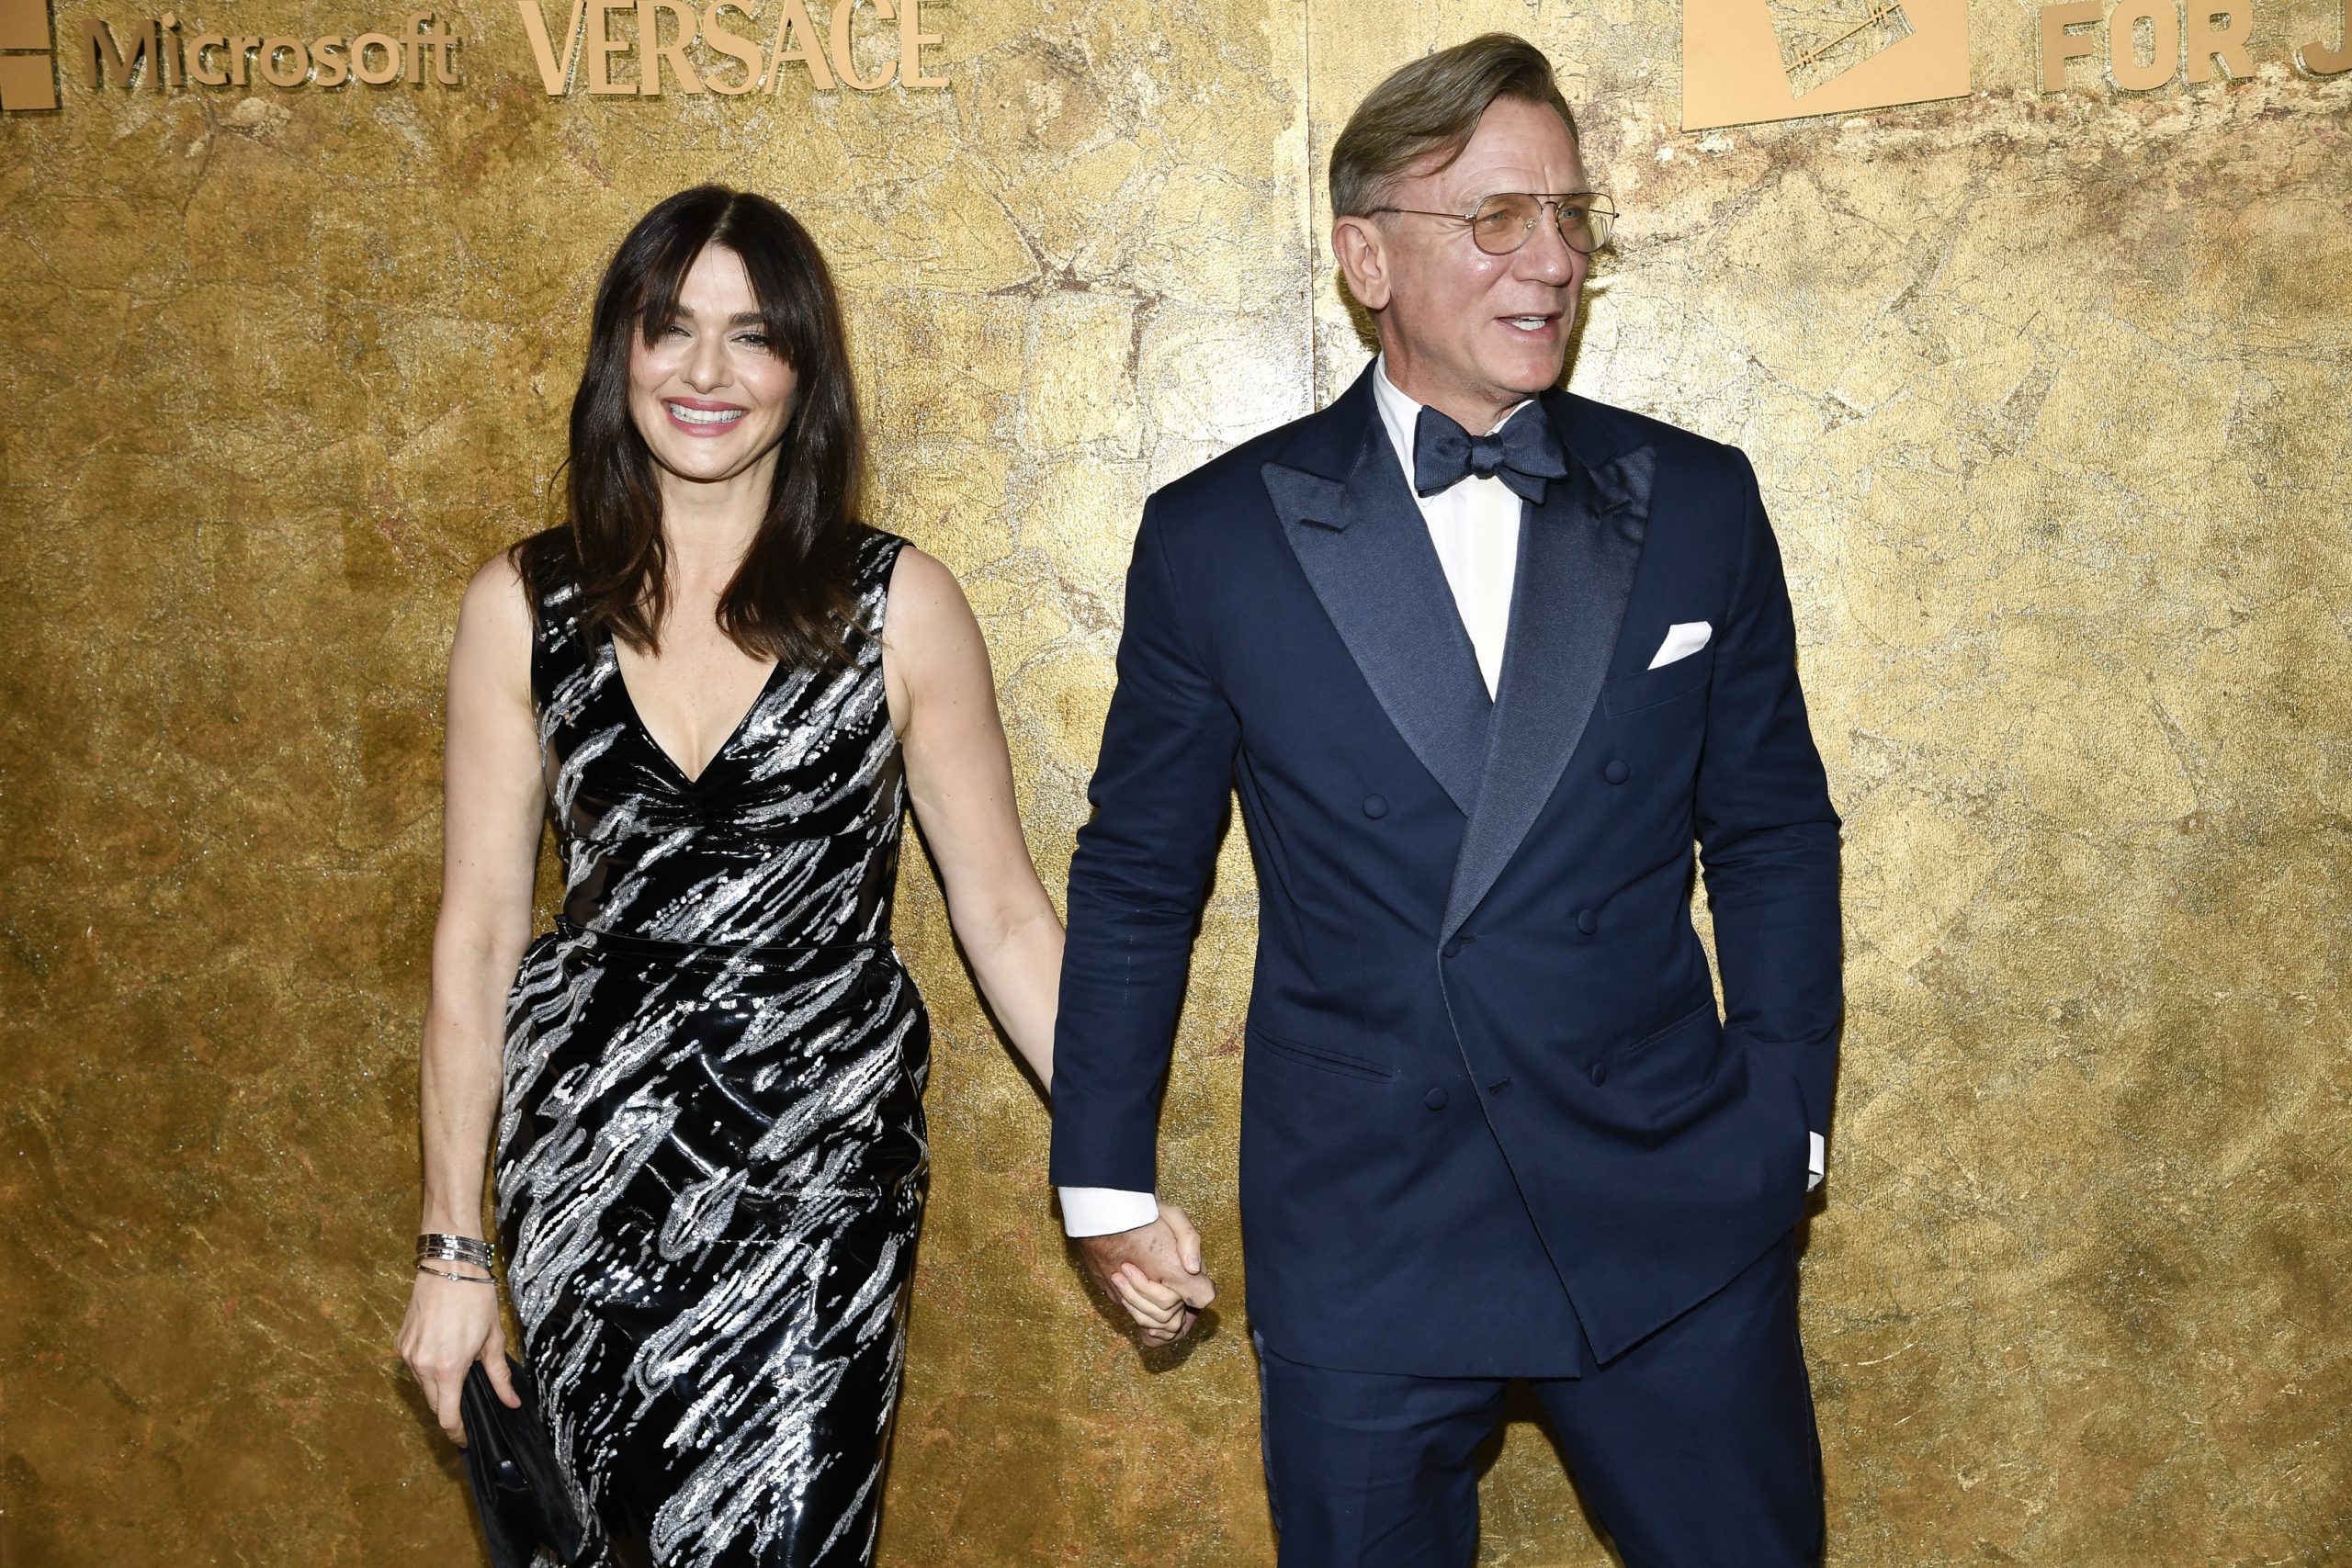 Rachel Weisz, left, and Daniel Craig attend The Albies, hosted by the Clooney Foundation for Justice, at the New York Public Library, Thursday, Sept. 28, 2023, in New York. (Photo by Evan Agostini/Invision/AP)